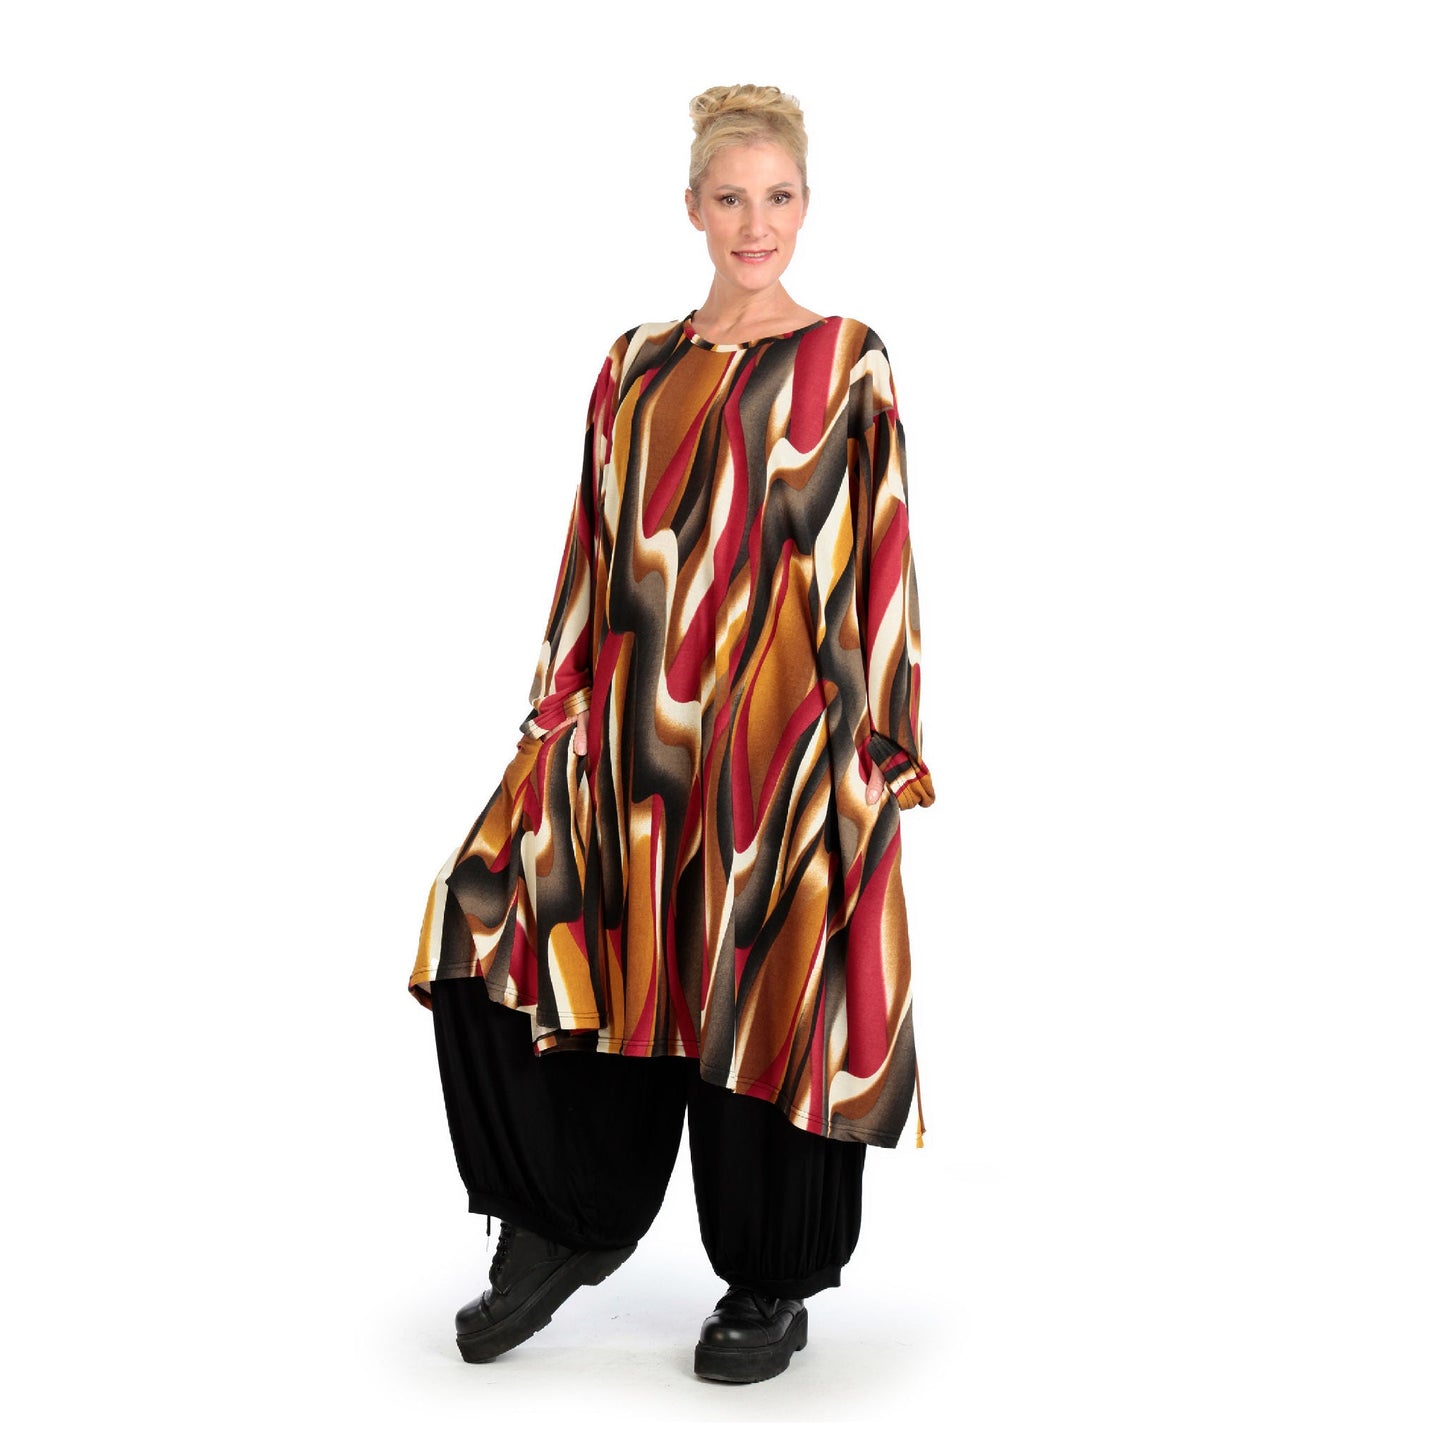 Winter dress in A-shape made of soft fine knit quality, Aurora in cognac-red-white